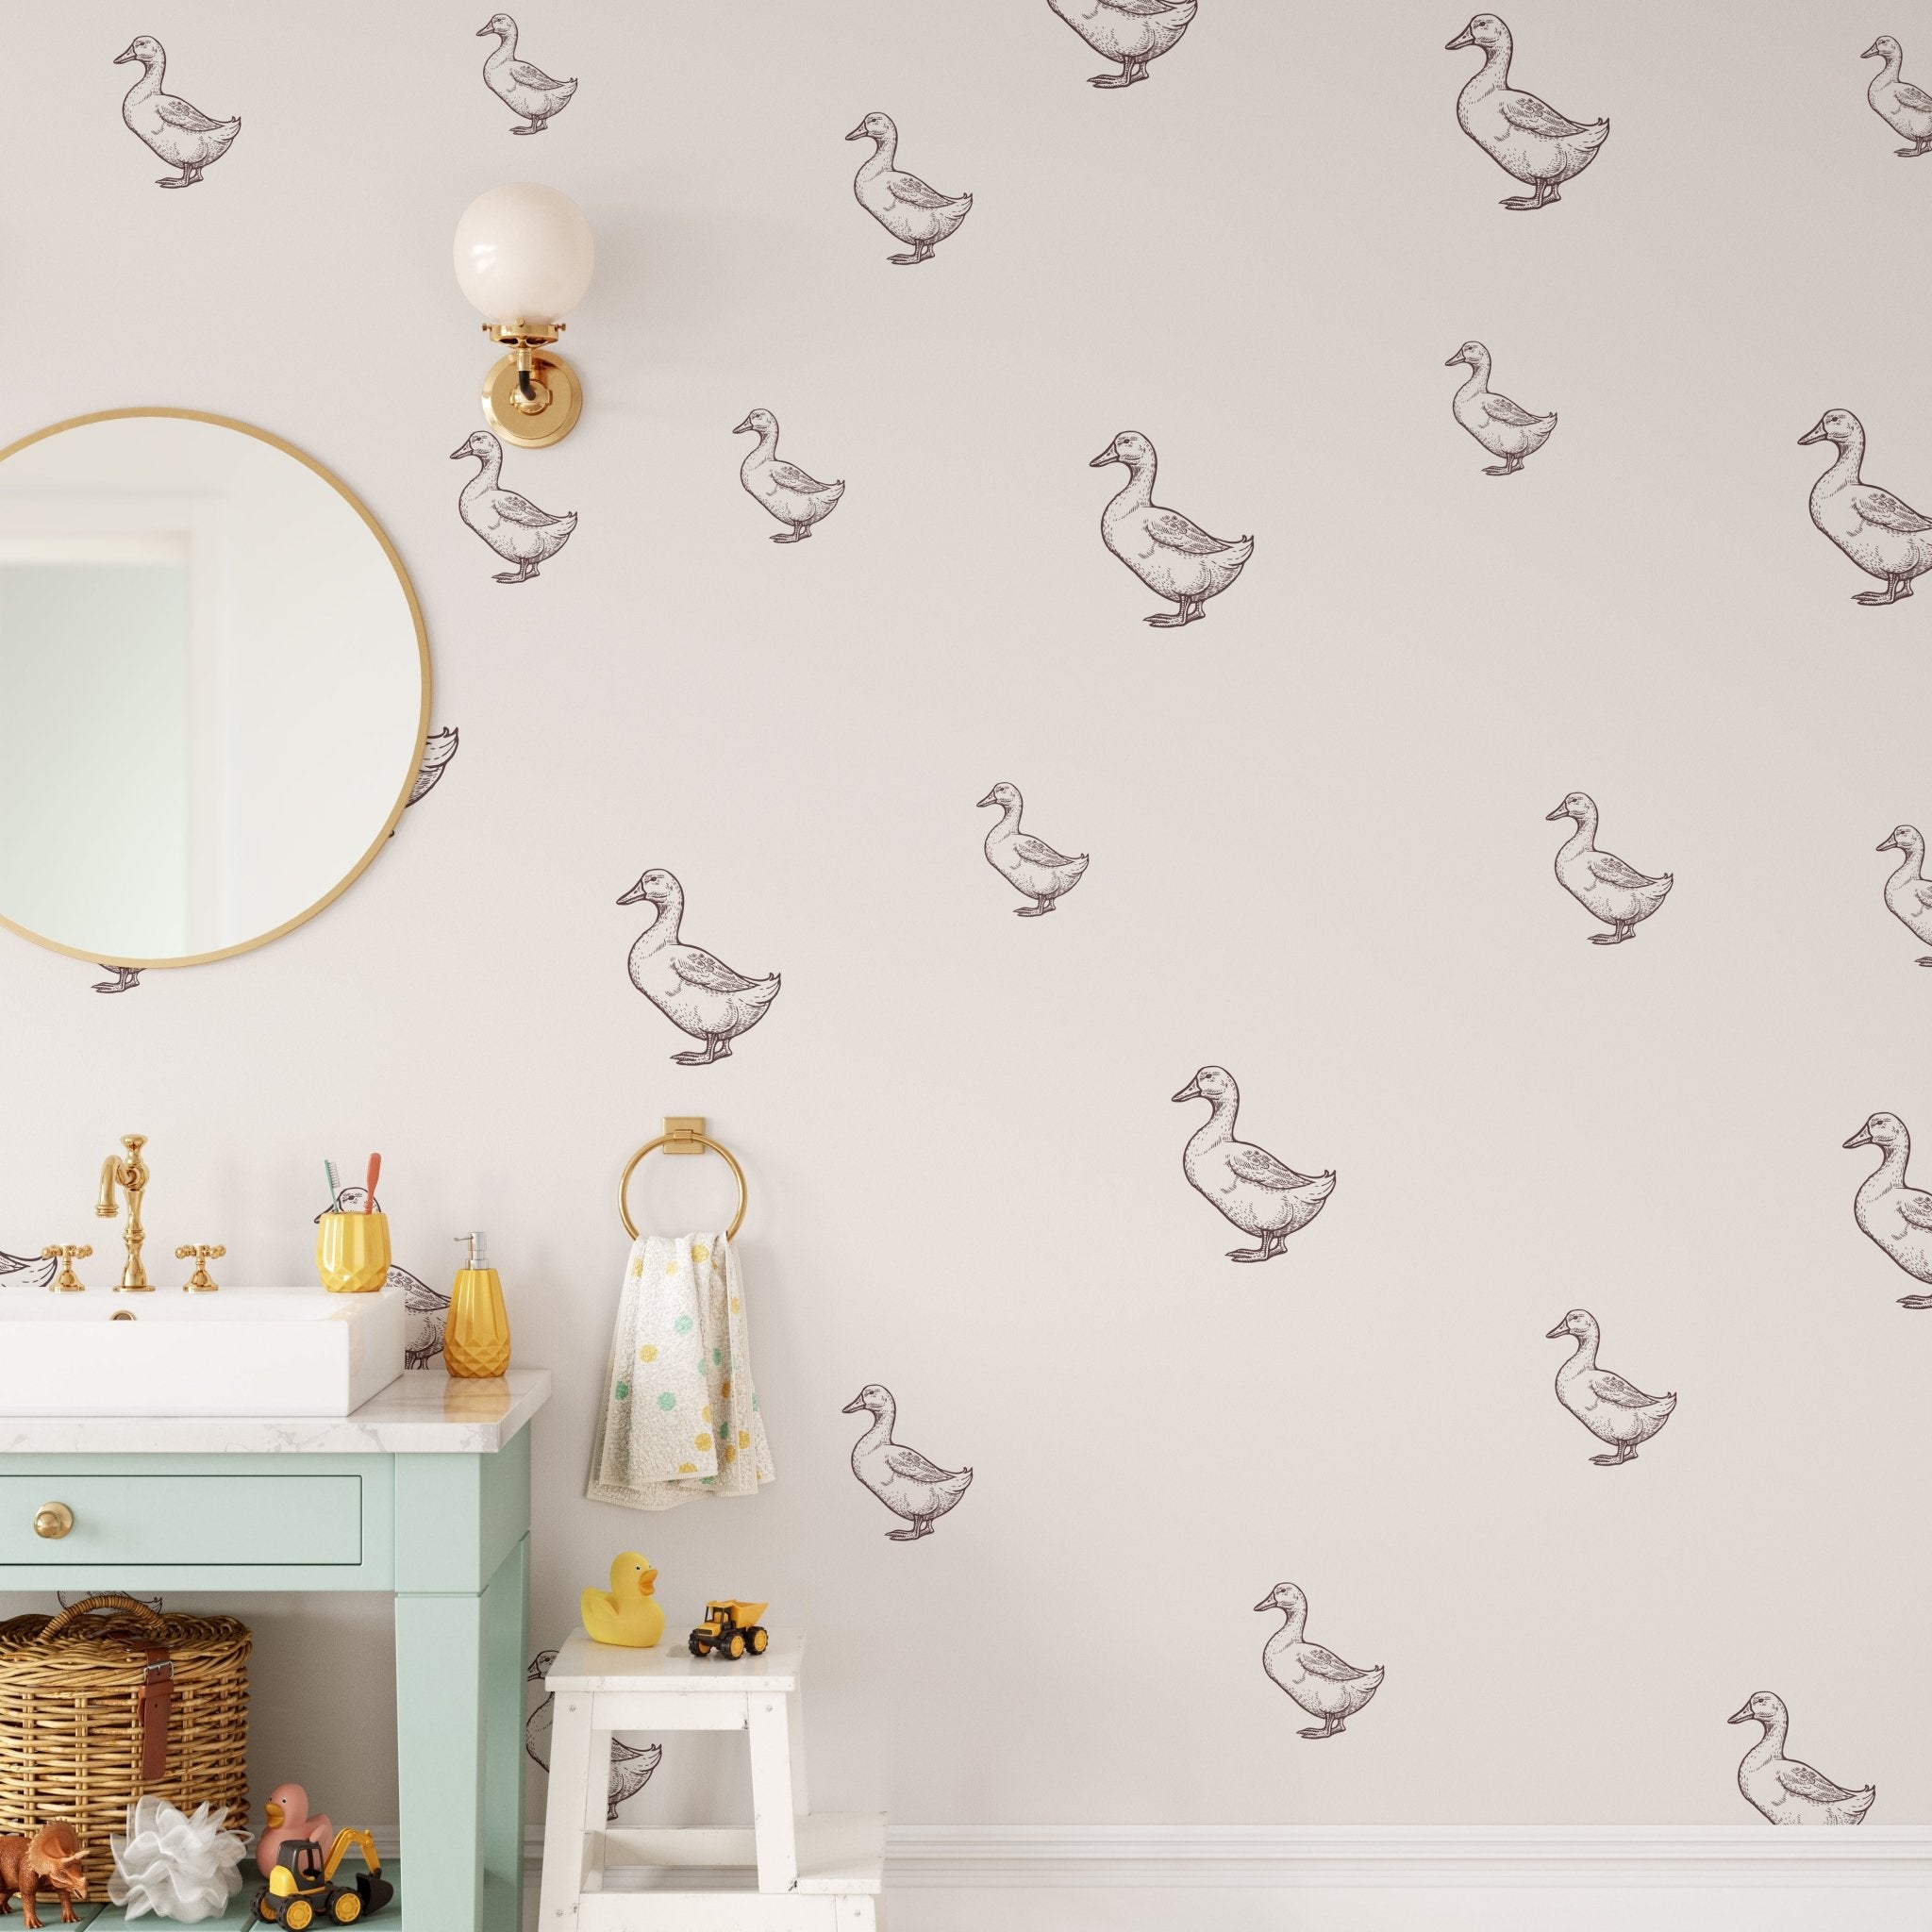 White and Black Goose Decals in a childs bathroom, peel and stick geese stickers